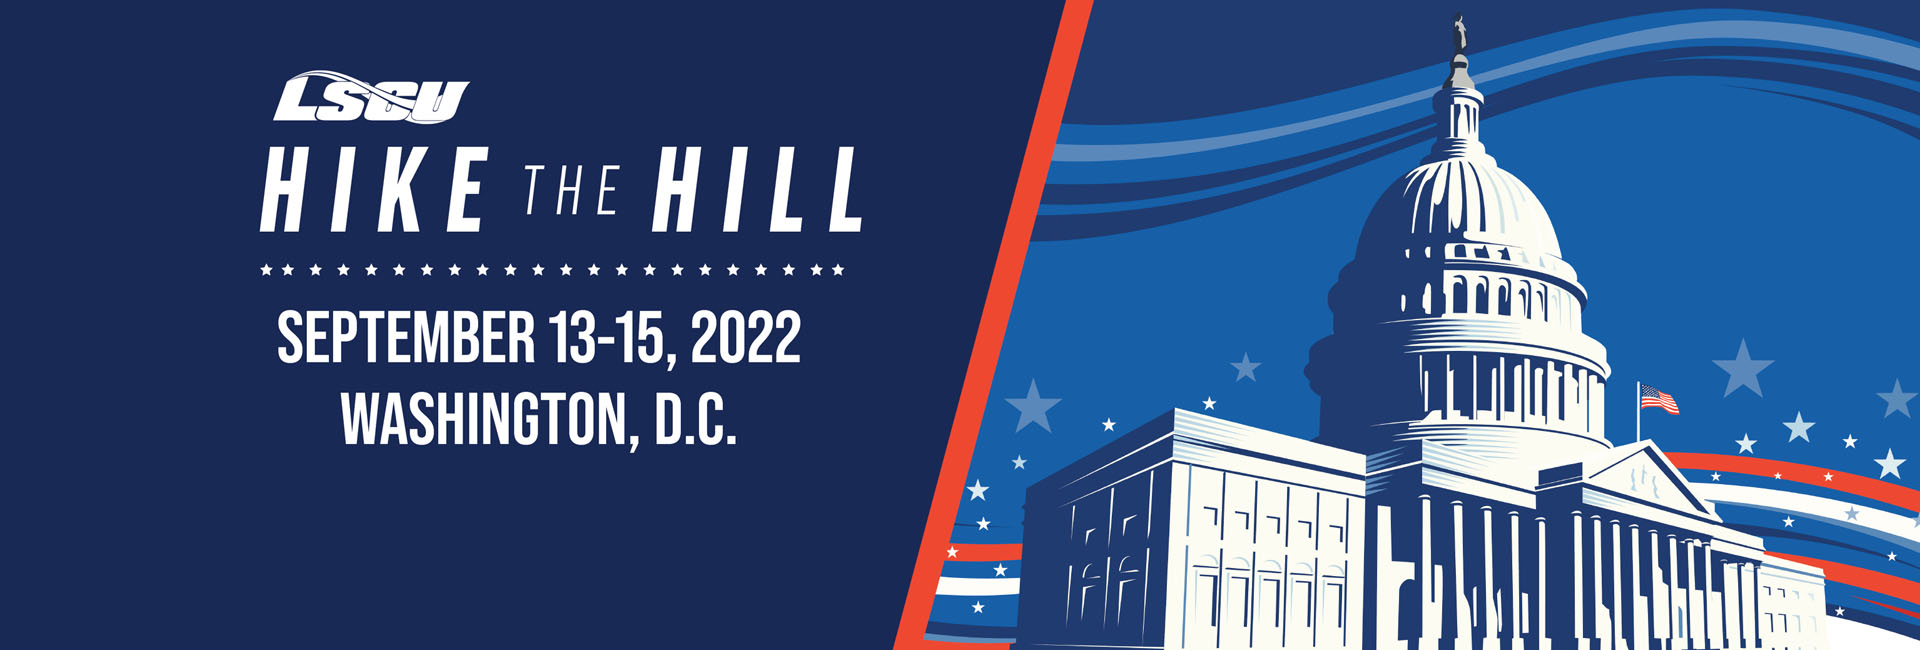 2022 Hike the Hill